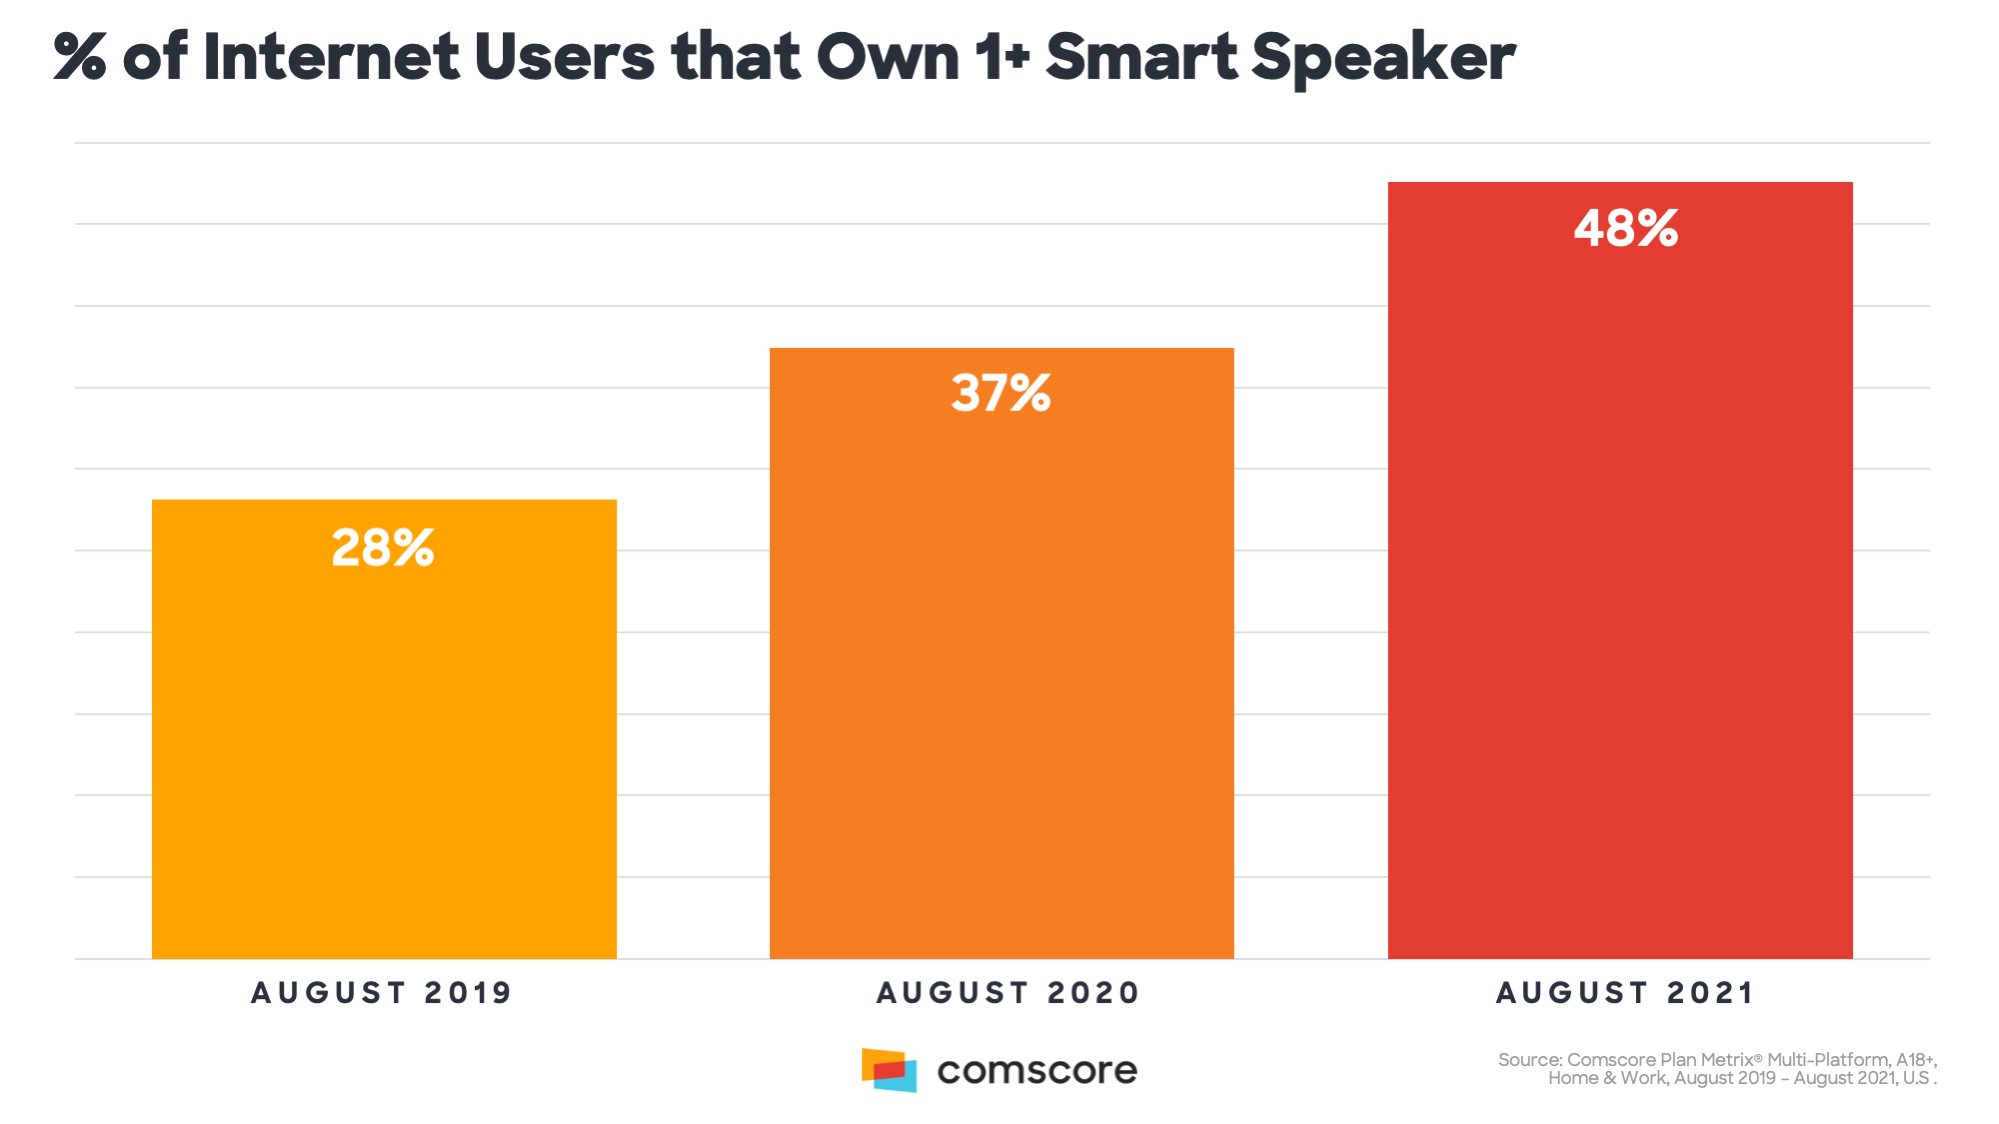 Percentage of Internet Users that Own 1 or more Smart Speaker